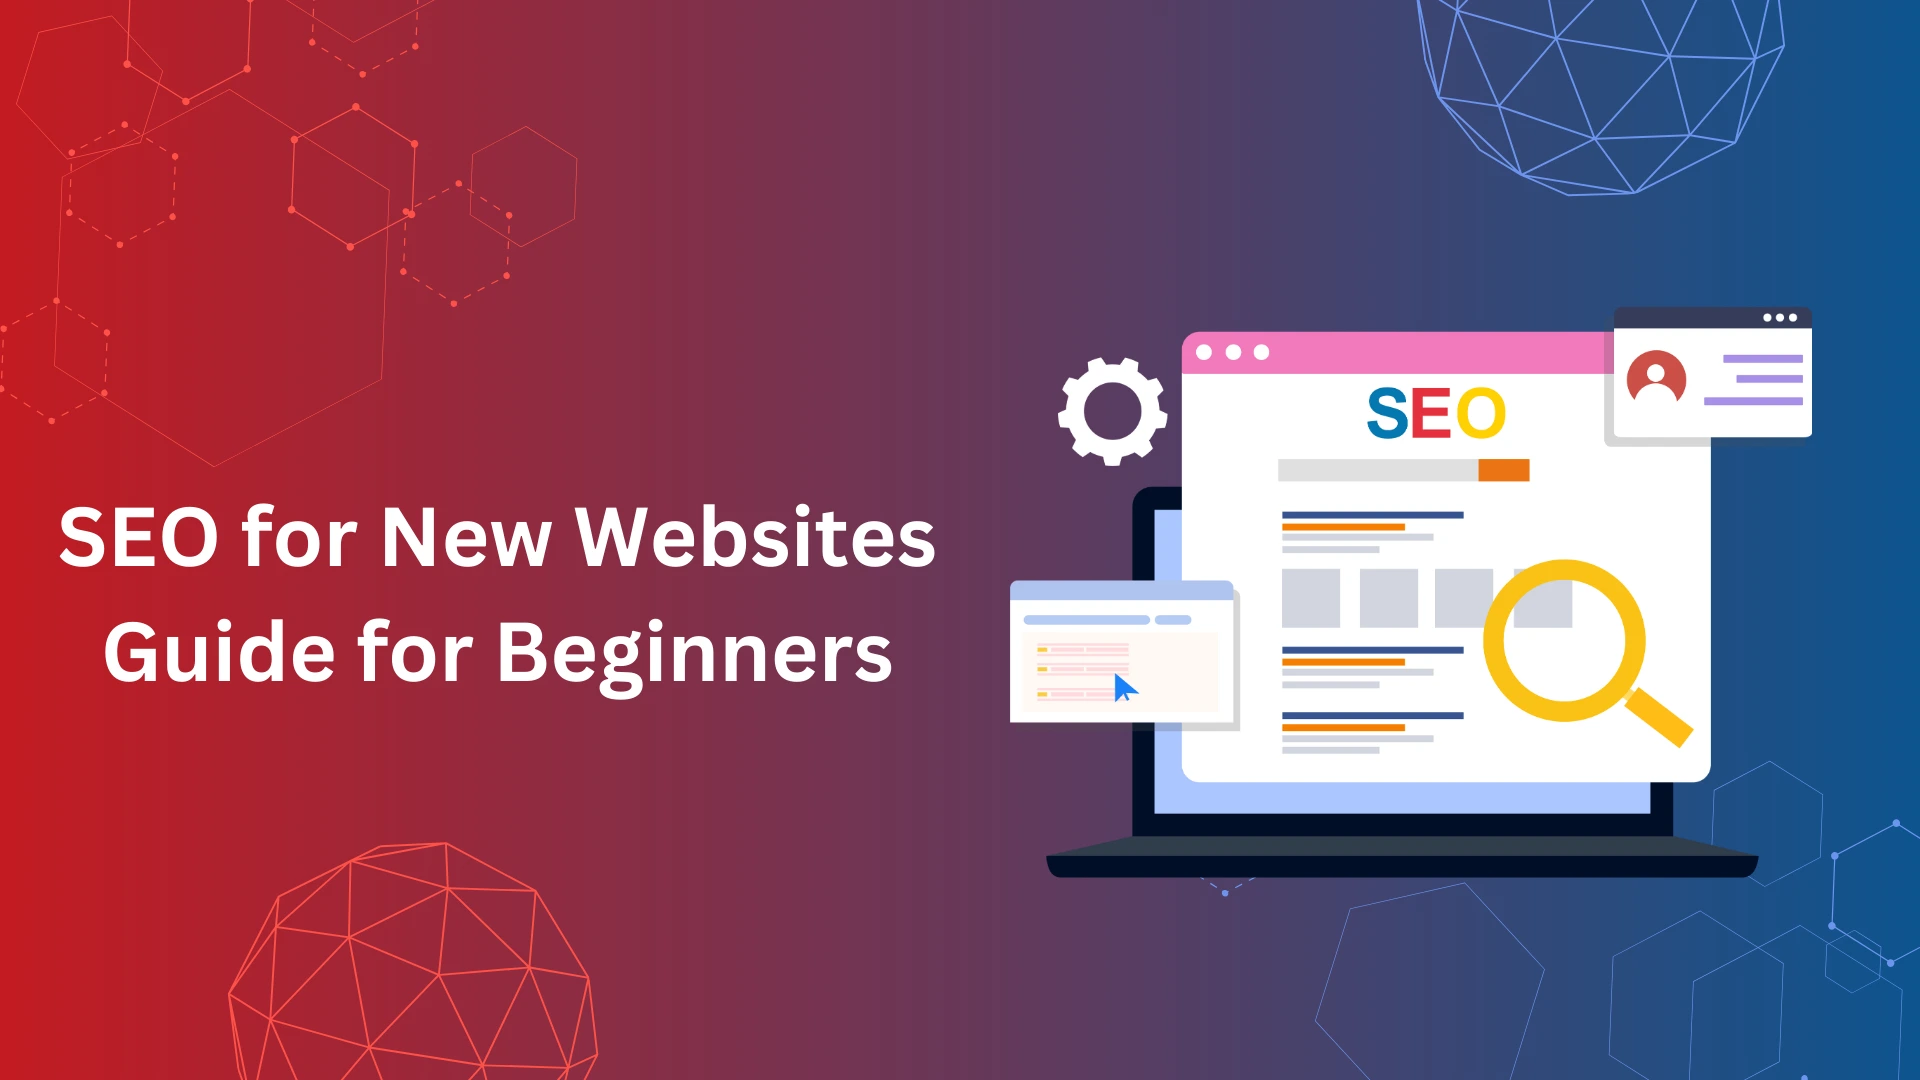 SEO for New Websites - Guide for Beginners